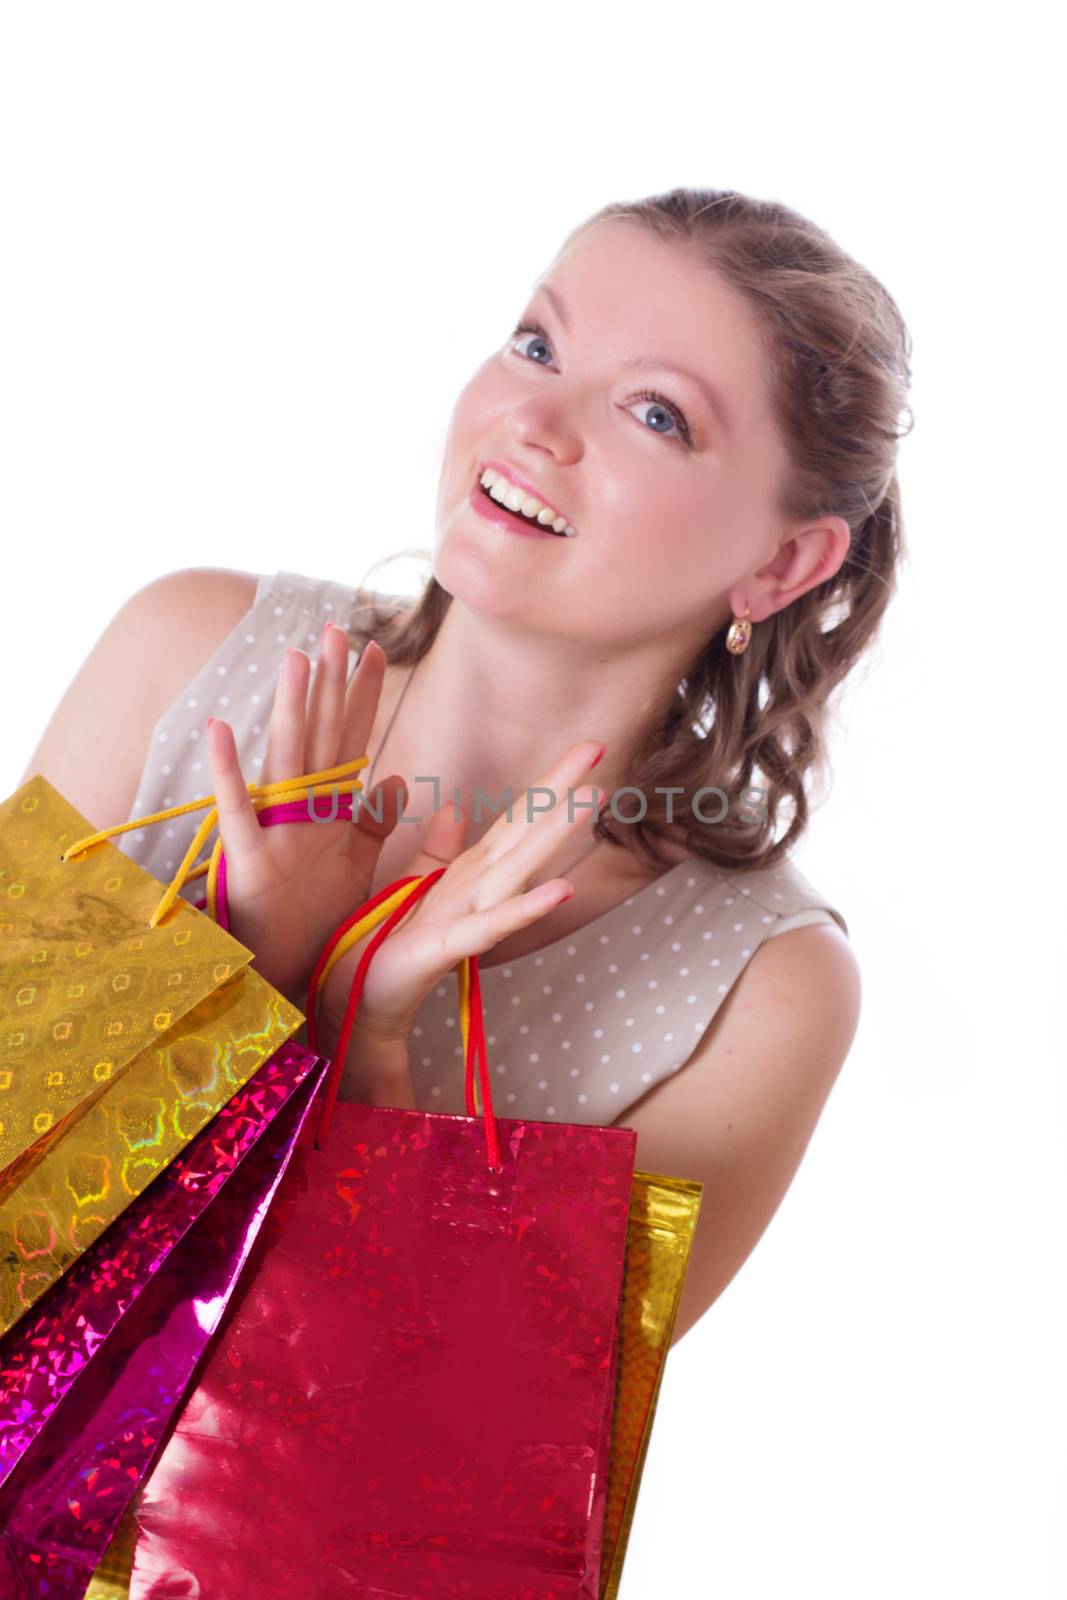 Amazed woman with shopping bags isolated on white